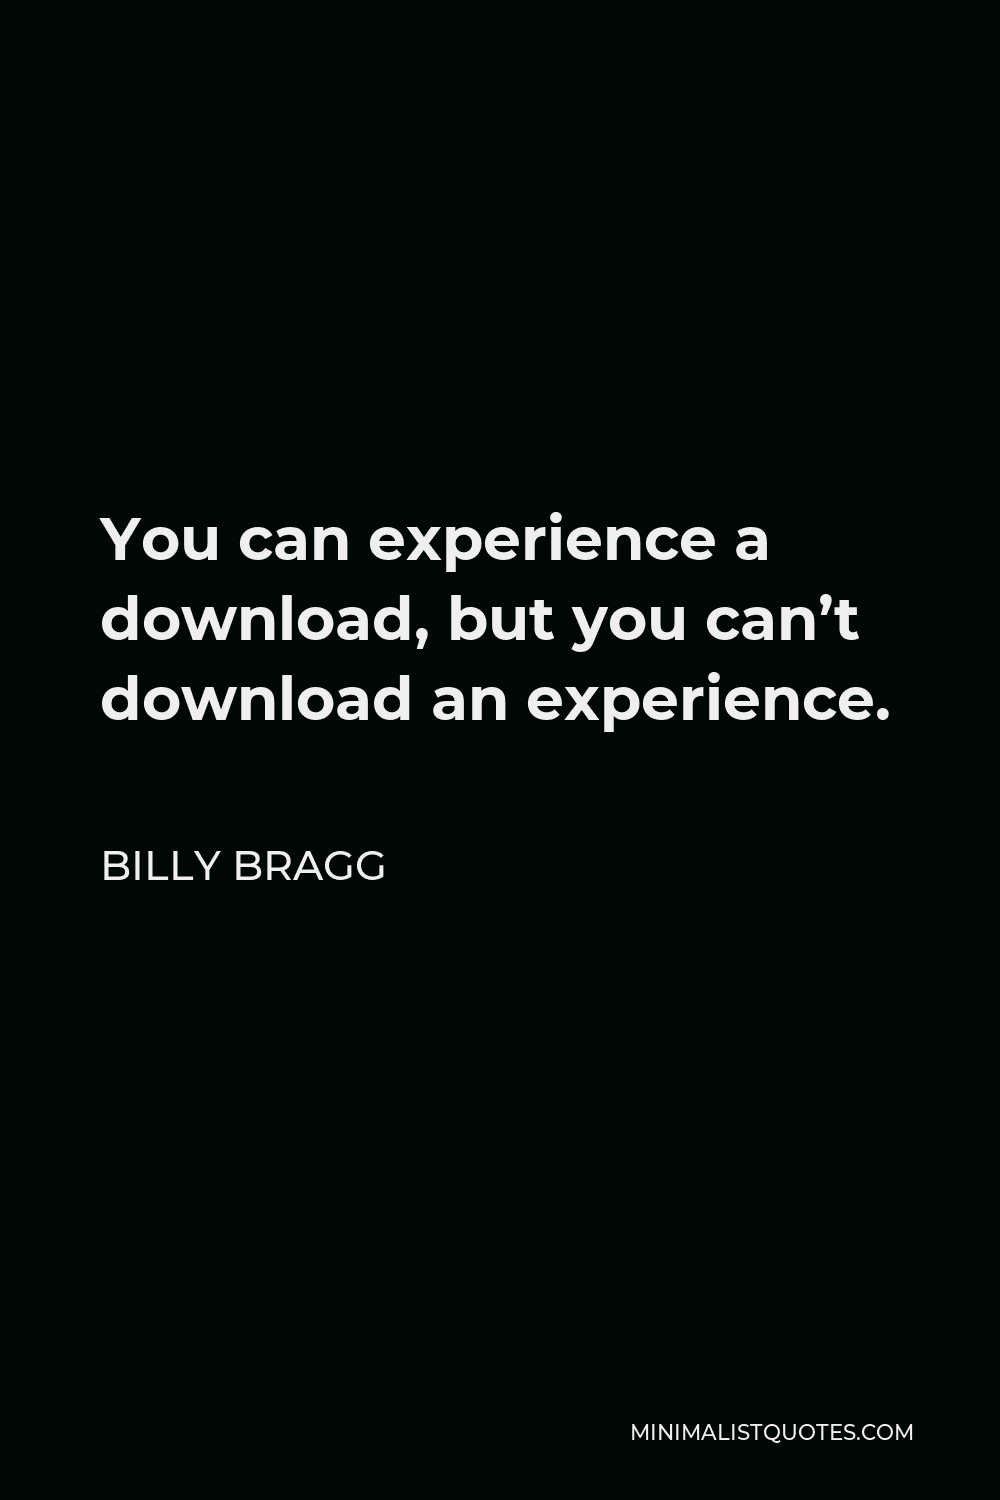 Billy Bragg Quote - You can experience a download, but you can’t download an experience.